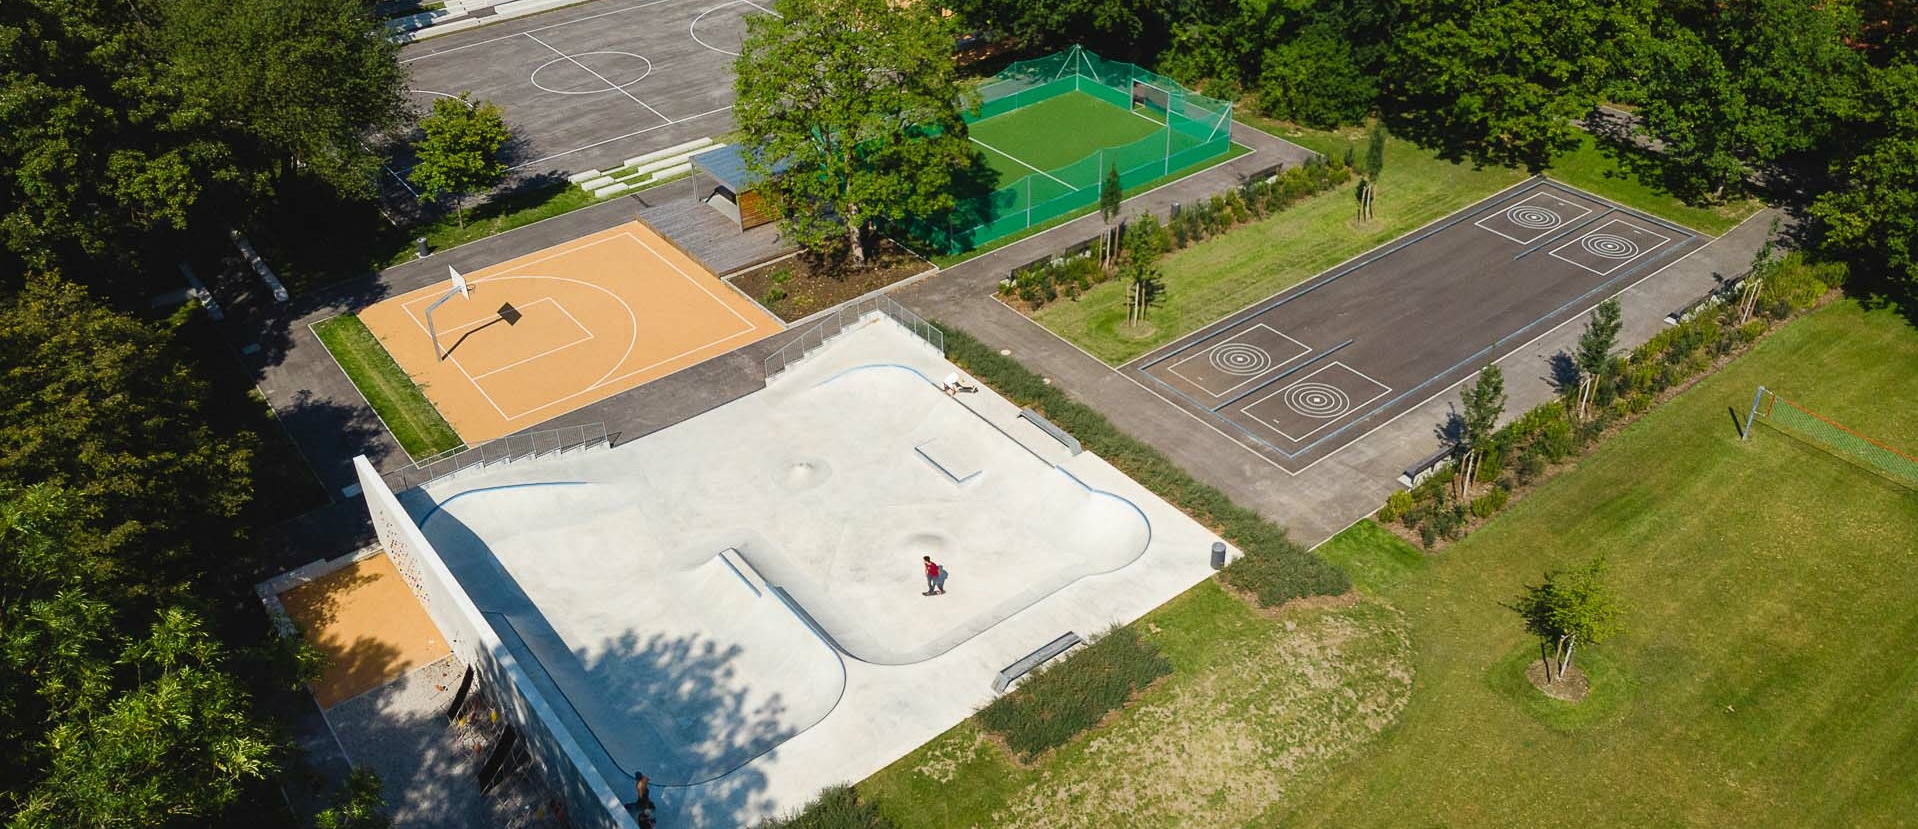 Drone image of skate park and sports fields surrounded by meadow and trees